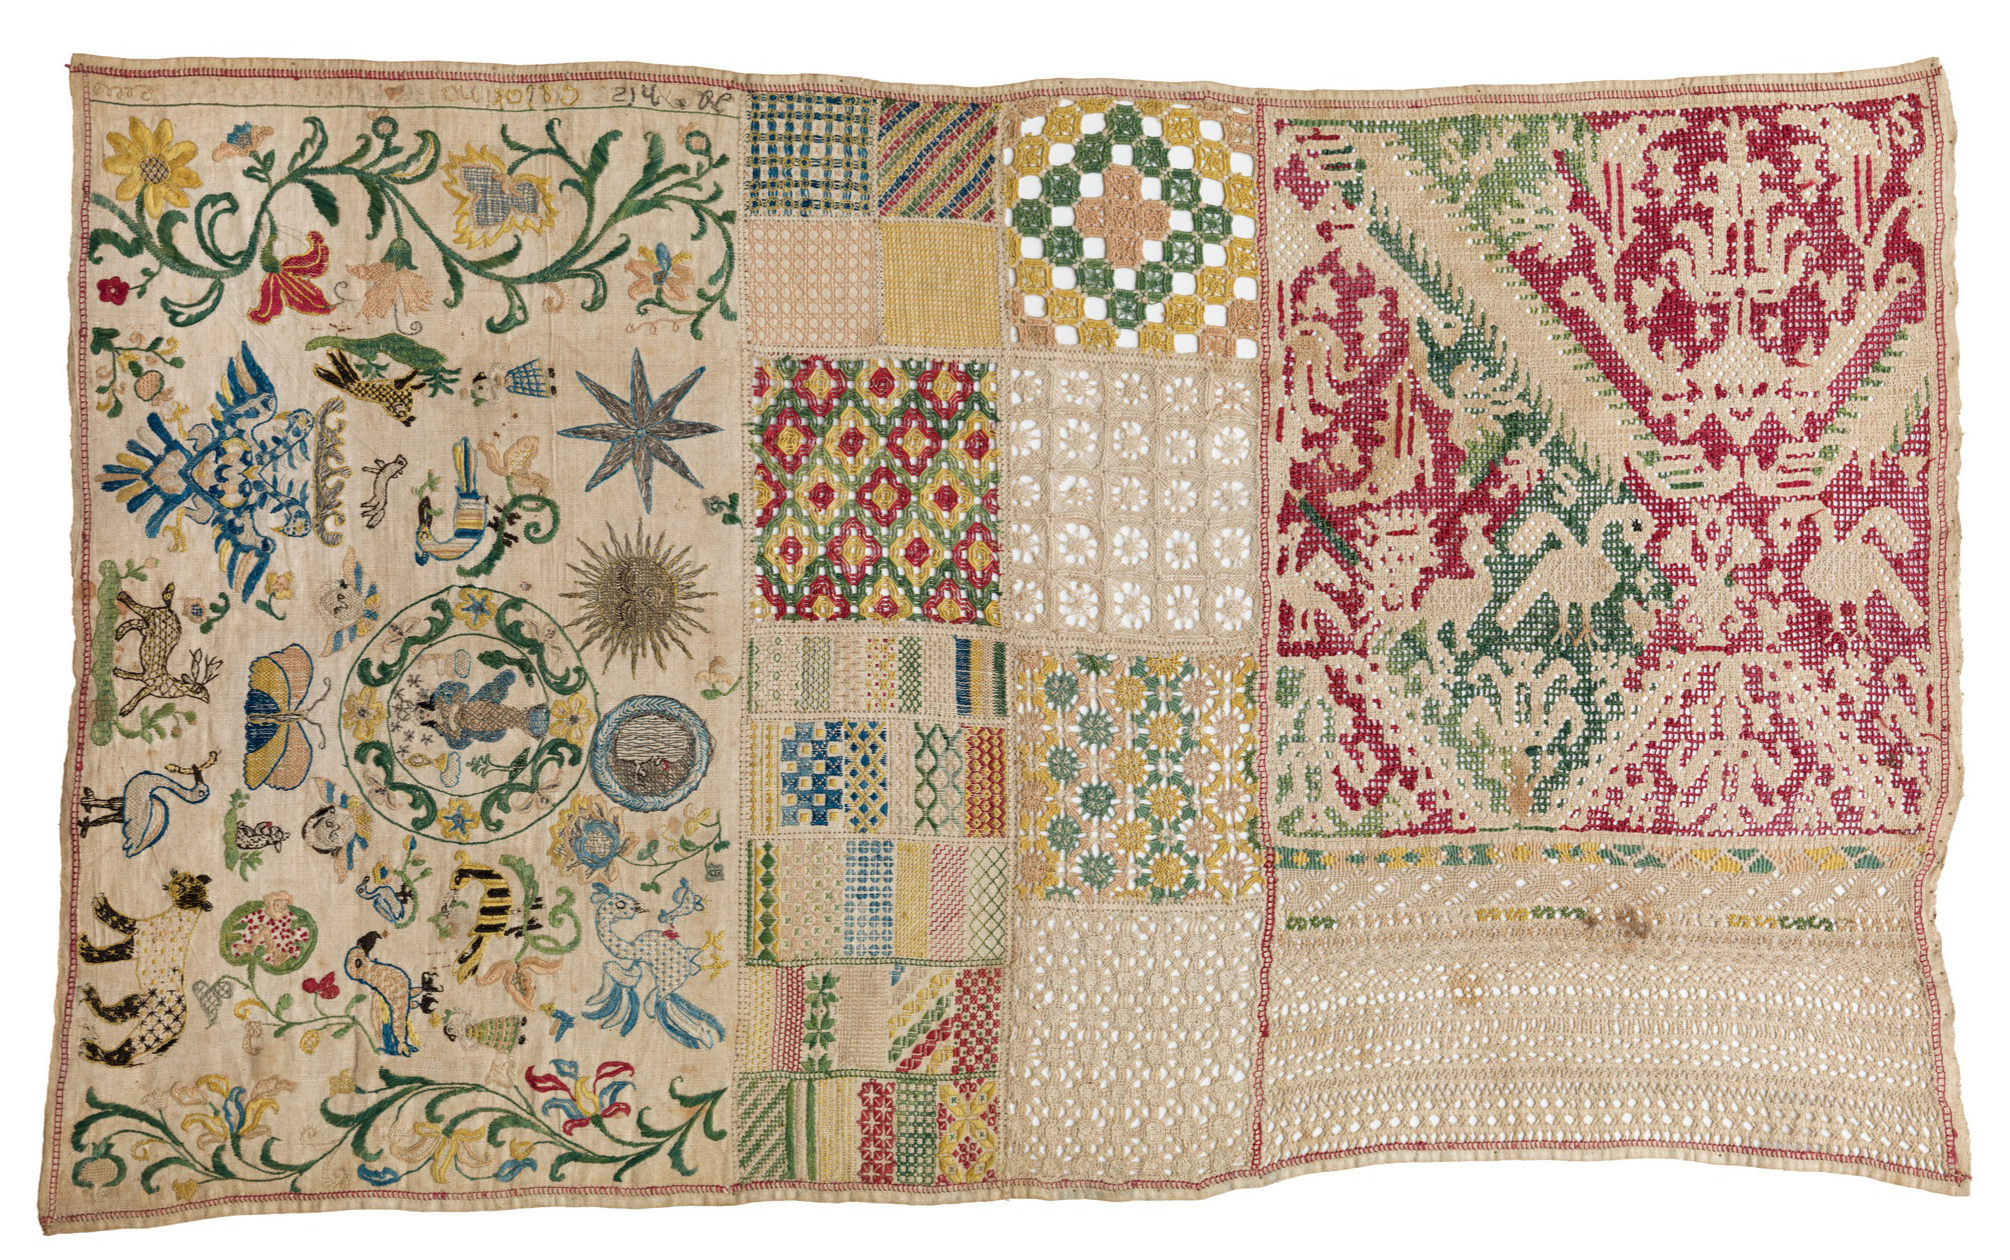 Sampler, Mexico, c. 1785, Los Angeles County Museum of Art, Costume Council Fund, photo © Museum Associates/LACMA